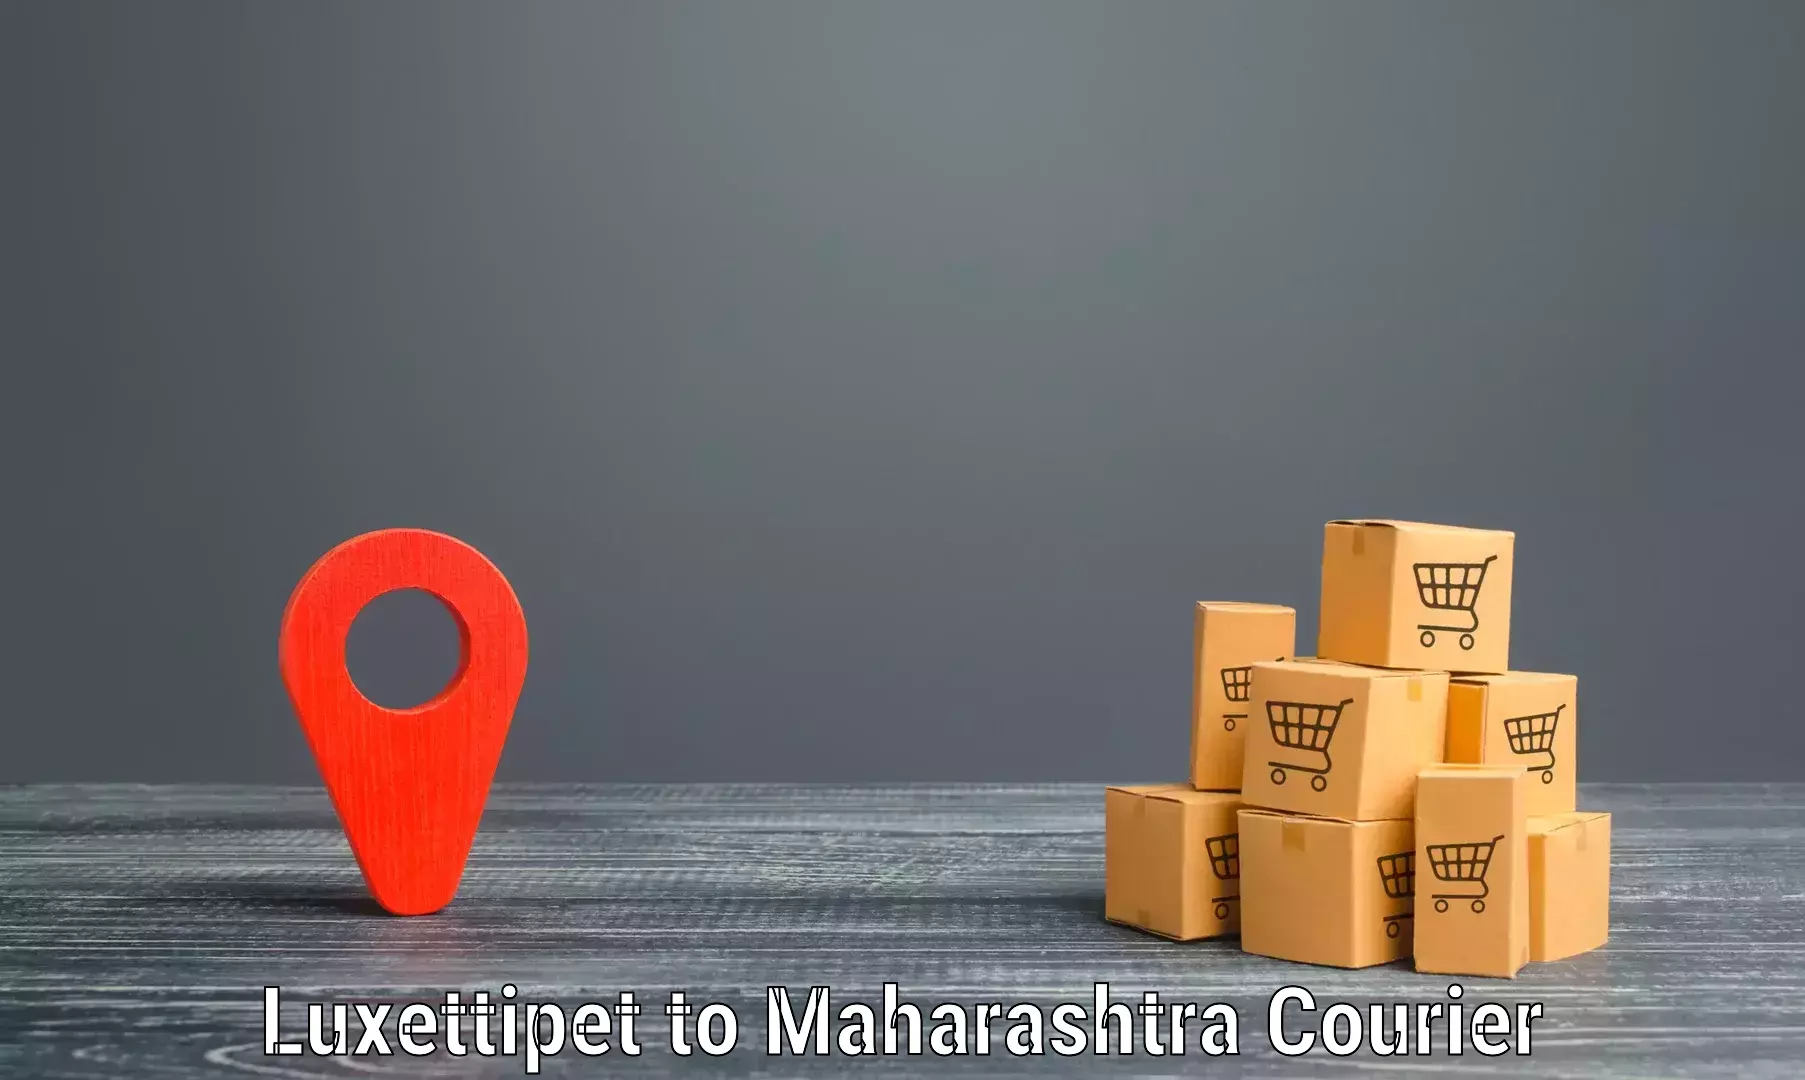 Corporate courier solutions Luxettipet to Ballarpur